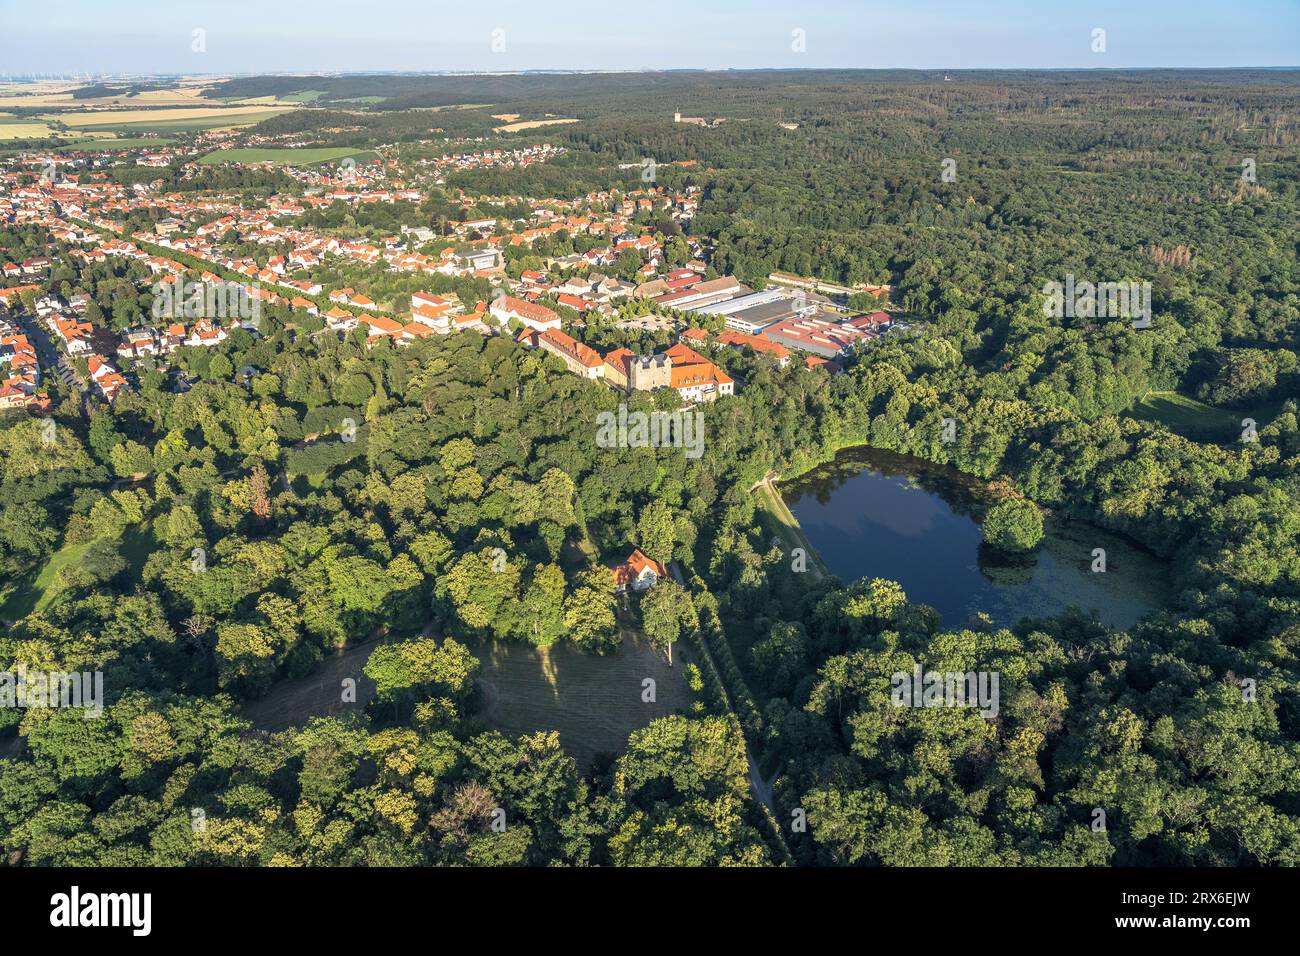 Germany, Saxony-Anhalt, Ballenstedt, Aerial view of lake in front of Ballenstedt Castle Stock Photo